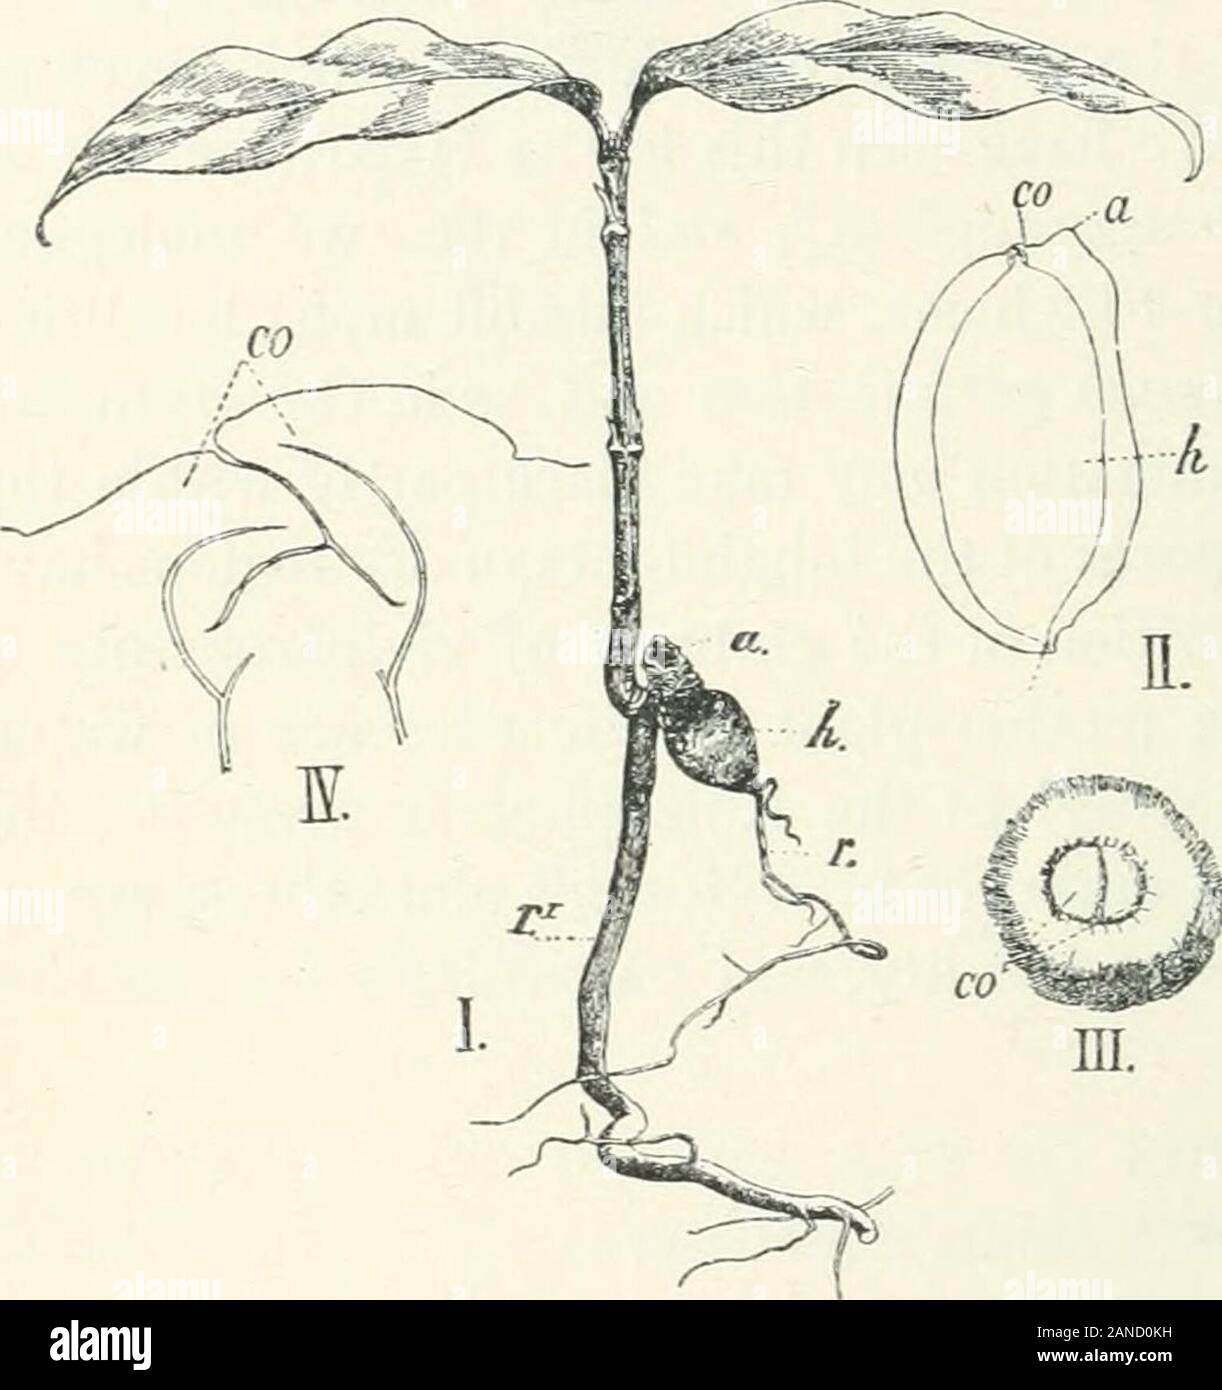 Organography of plants, especially of the archegoniatae and spermaphyta . oning species of Utricularia, which might havebeen quoted as illustrations, as I have spoken of them elsewhere.Our first example is from the family of the Guttiferae :— Xanthochymus pictorius.In Fig. 179 the configuration ofthe embryo and the germina-tion of Xanthochymus picto-rius, Roxb., is illustrated^. Thelongitudinal section (Fig. 179,II) shows the two very smallcotyledons, Co, but upon thesurface-view (Fig. 179,111) theyare more conspicuous. Theydo not appear right at the pointof the embryo but are pushedto the sid Stock Photo